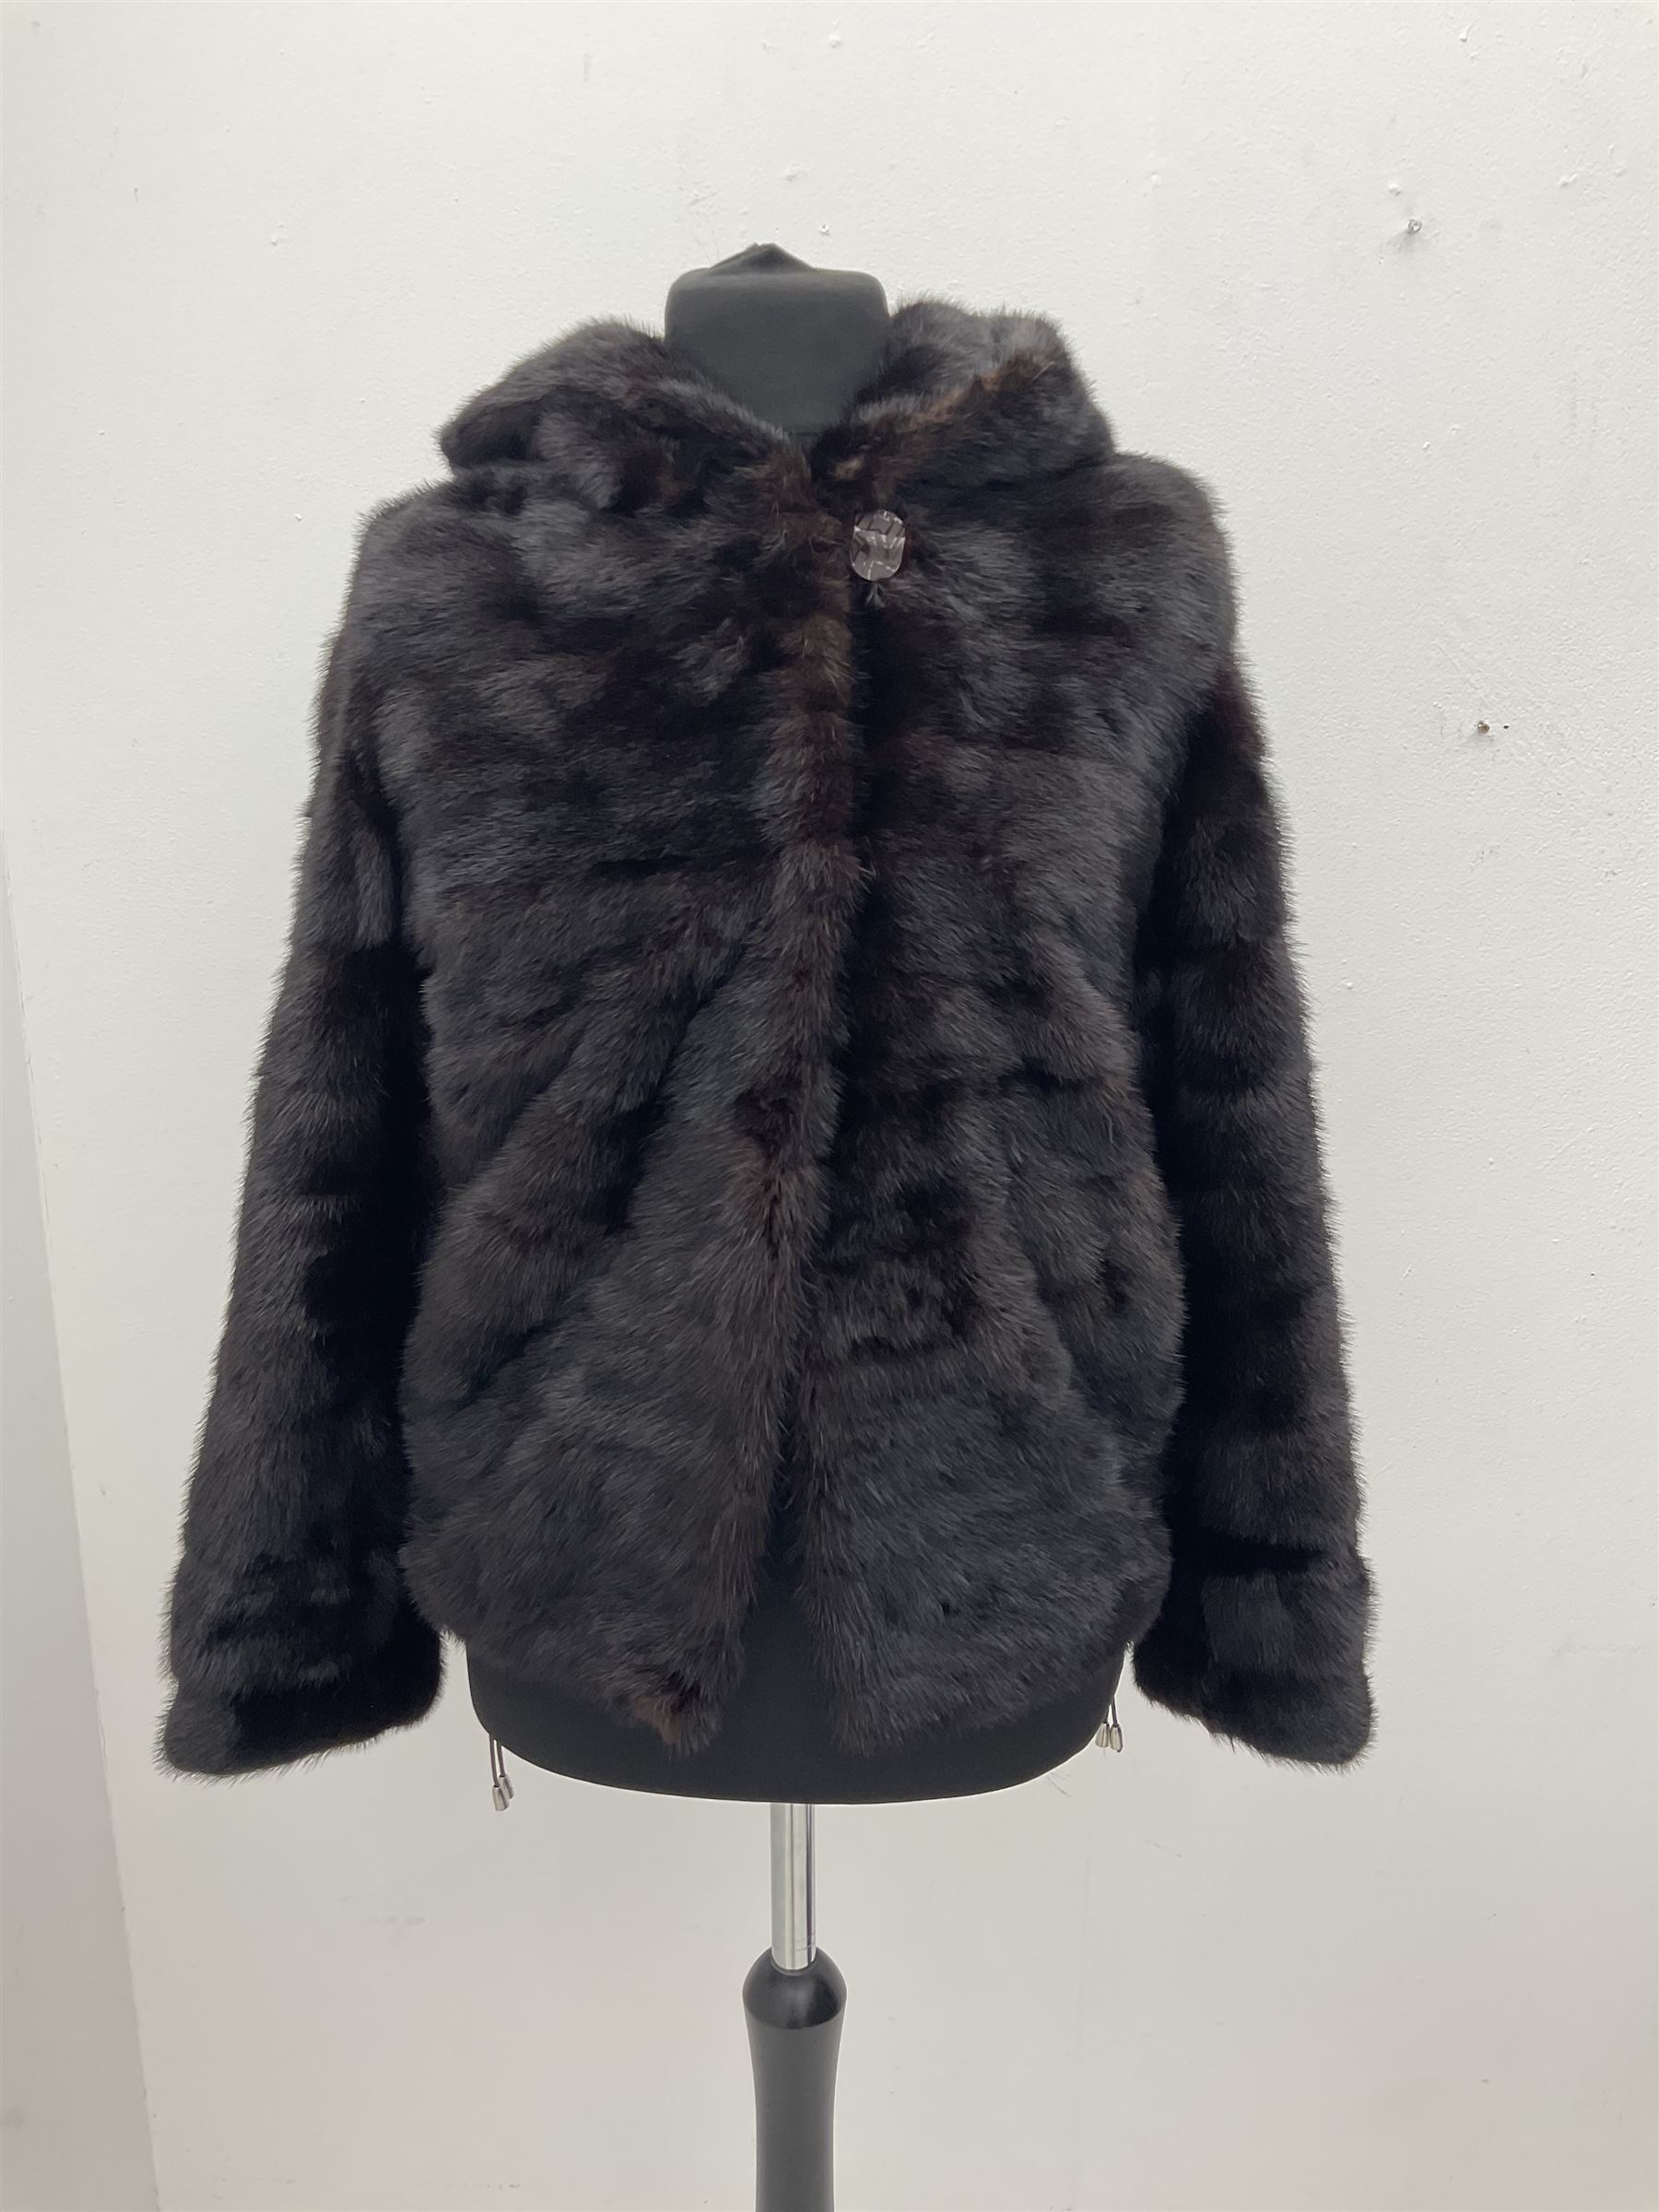 Modern cut lightweight nearly black mink jacket with integral hood - Image 2 of 6